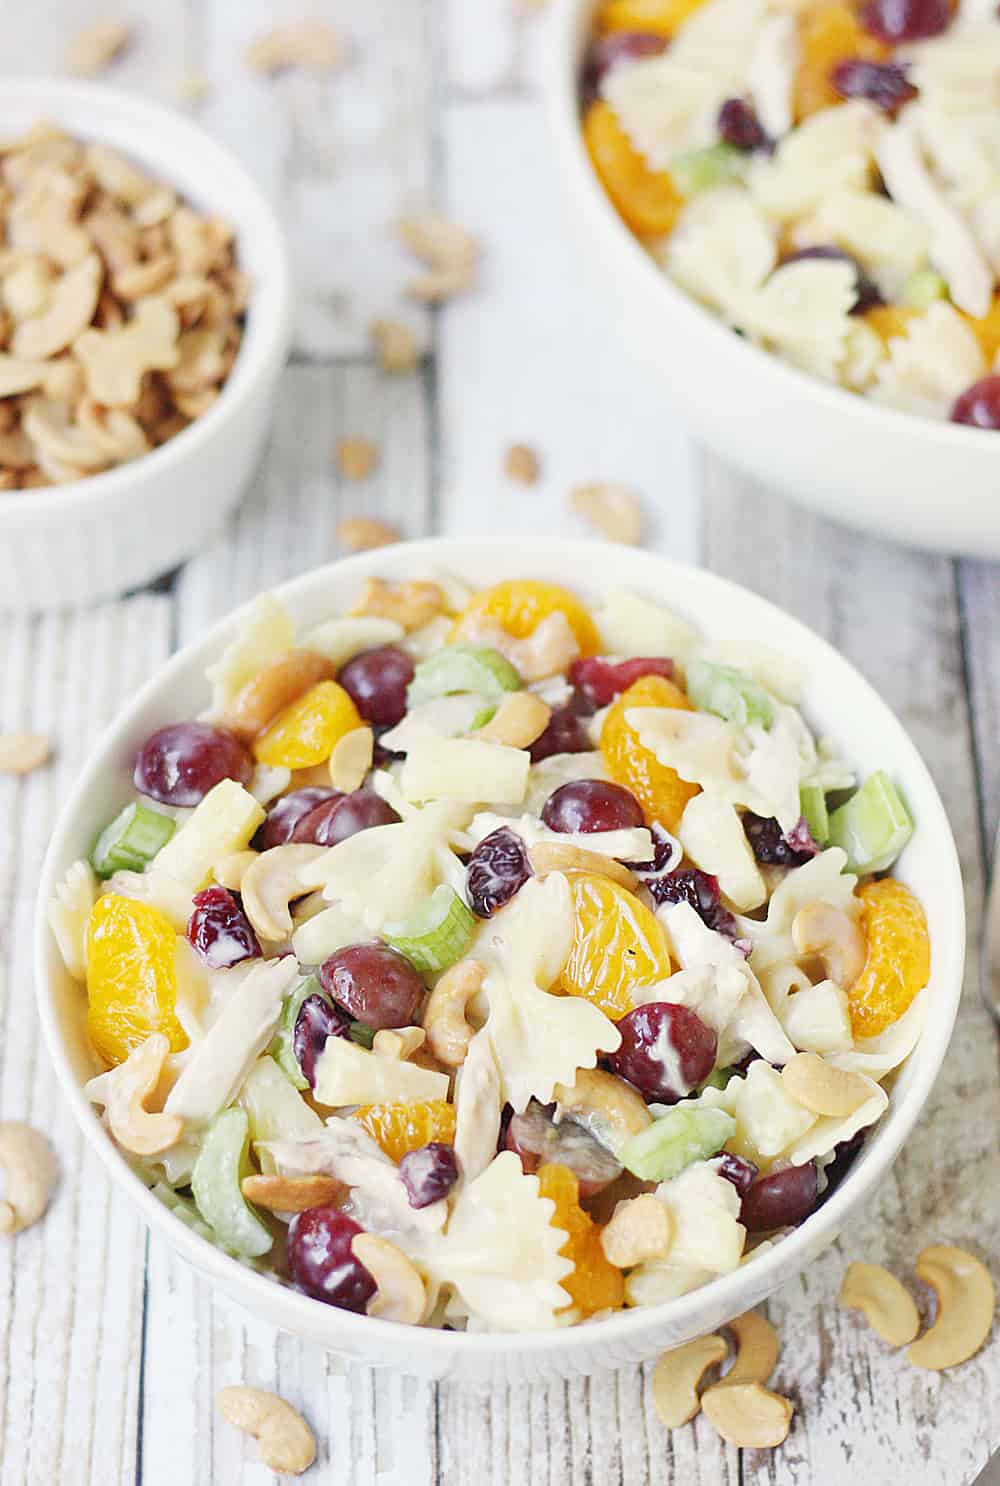 Chicken Bow Tie Pasta Salad -- Chicken bow tie pasta salad is the perfect summer salad! It combines so many delicious ingredients with the crunch of cashews and creamy coleslaw dressing.